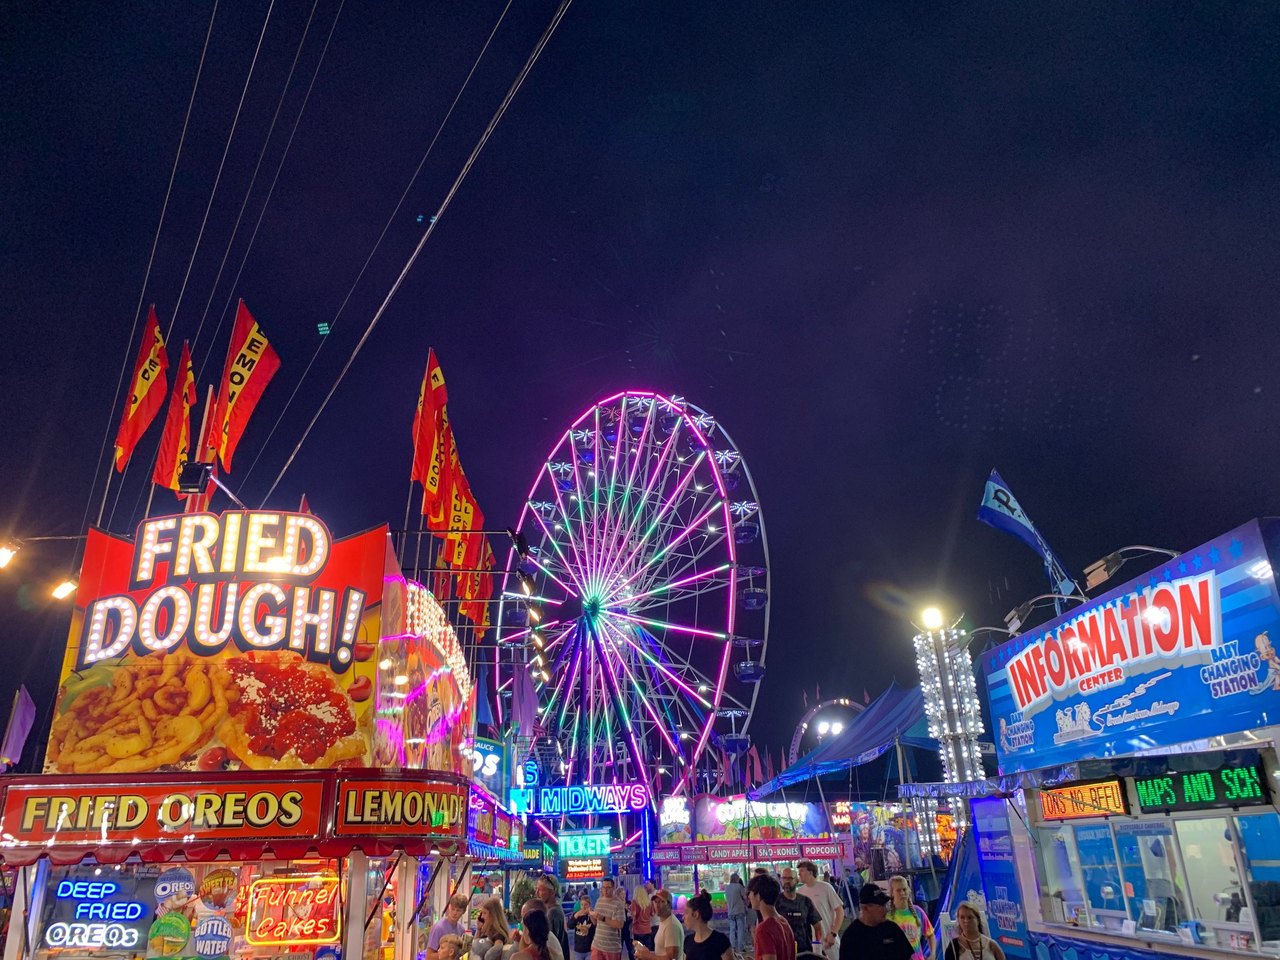 Start Planning Your Visit To The Big Butler Fair Near Pittsburgh